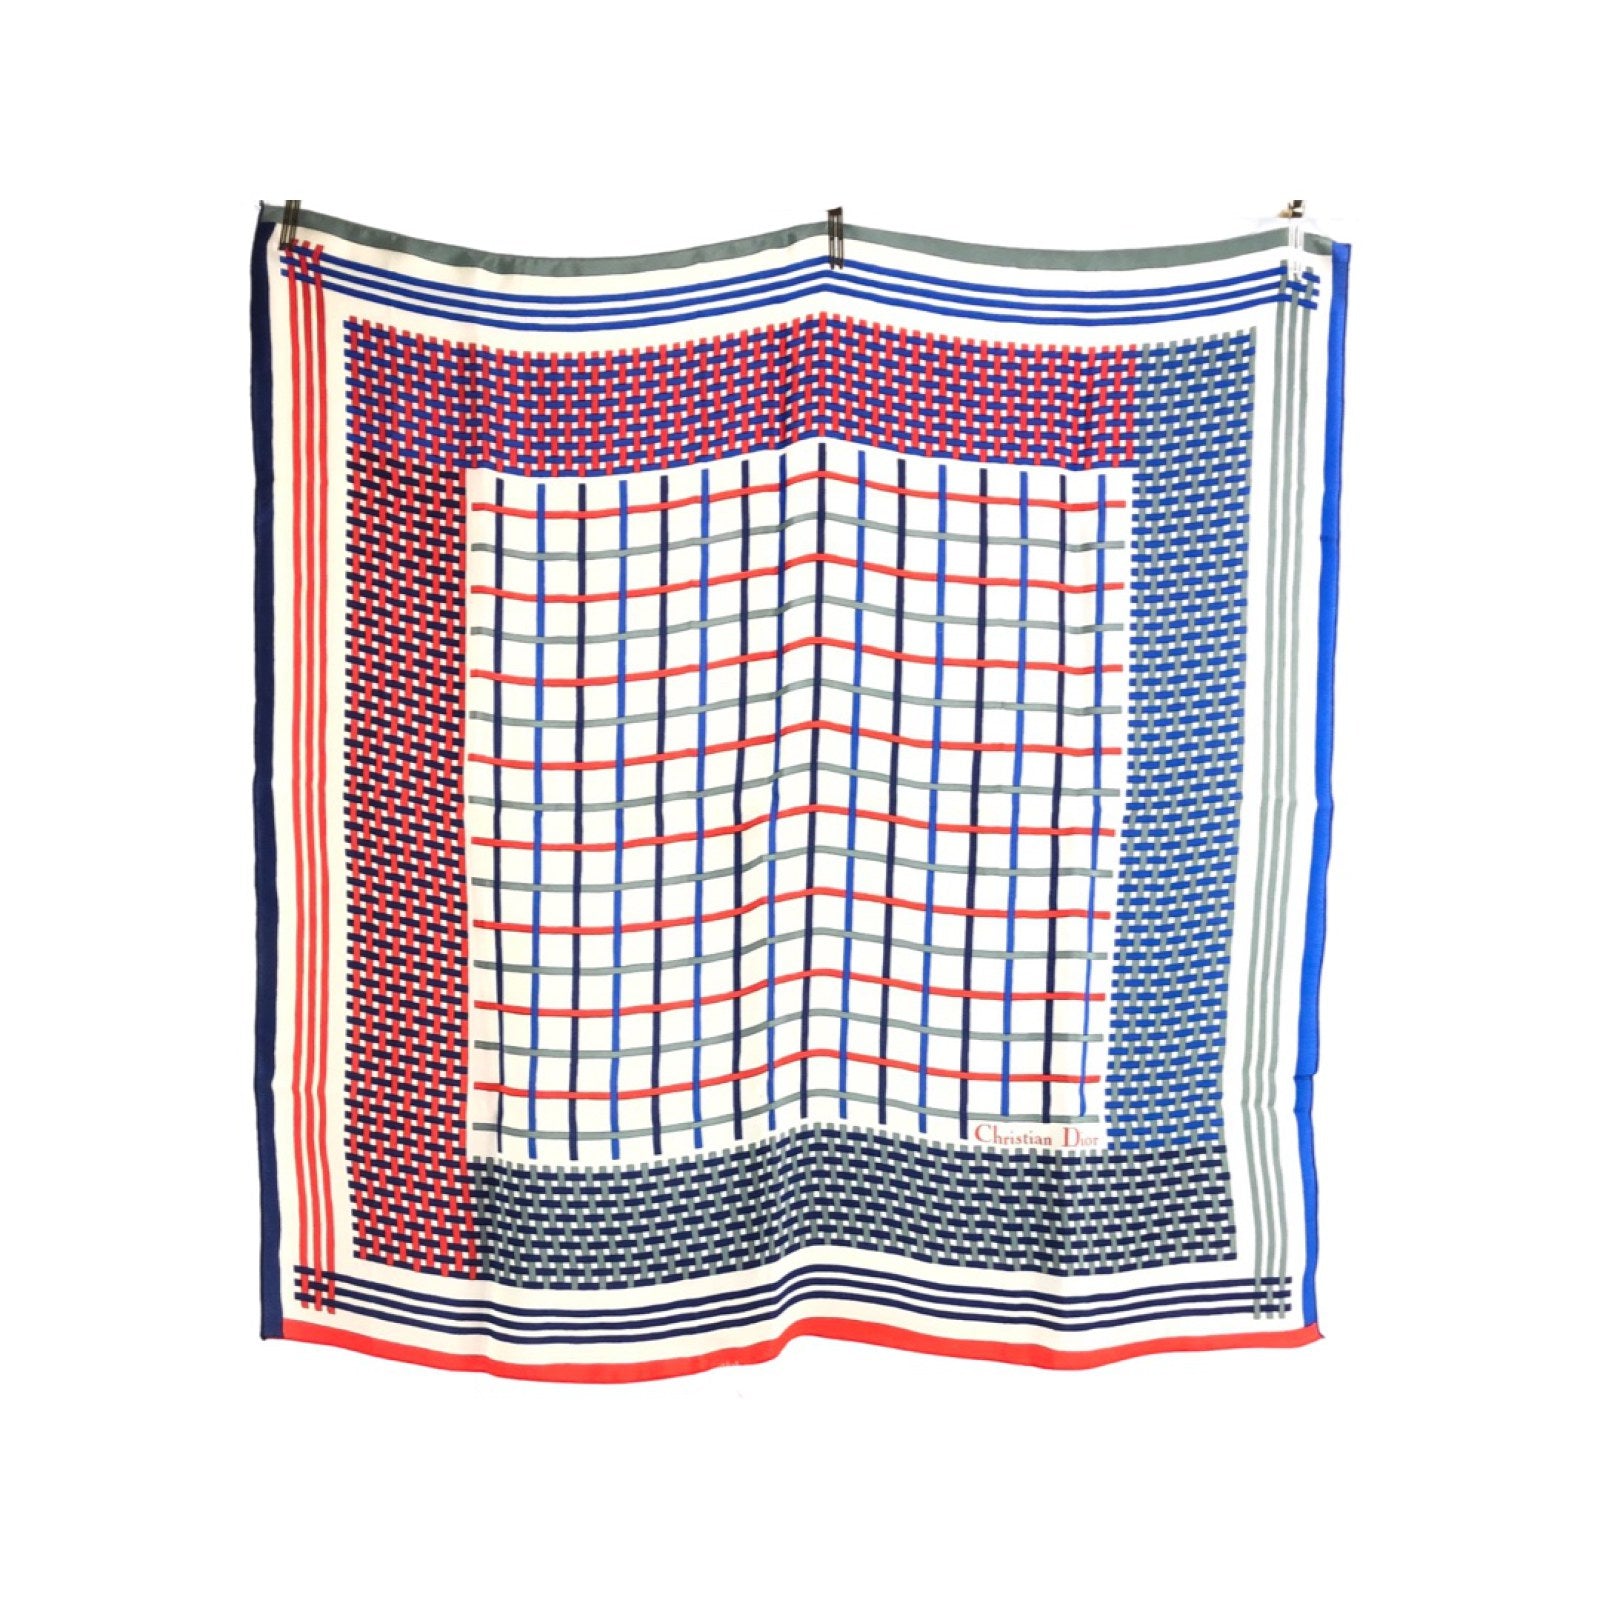 CHRISTIAN Dior Vintage Red/Blue/White Woven Print 70 Square Silk Scarf -  The Purse Ladies